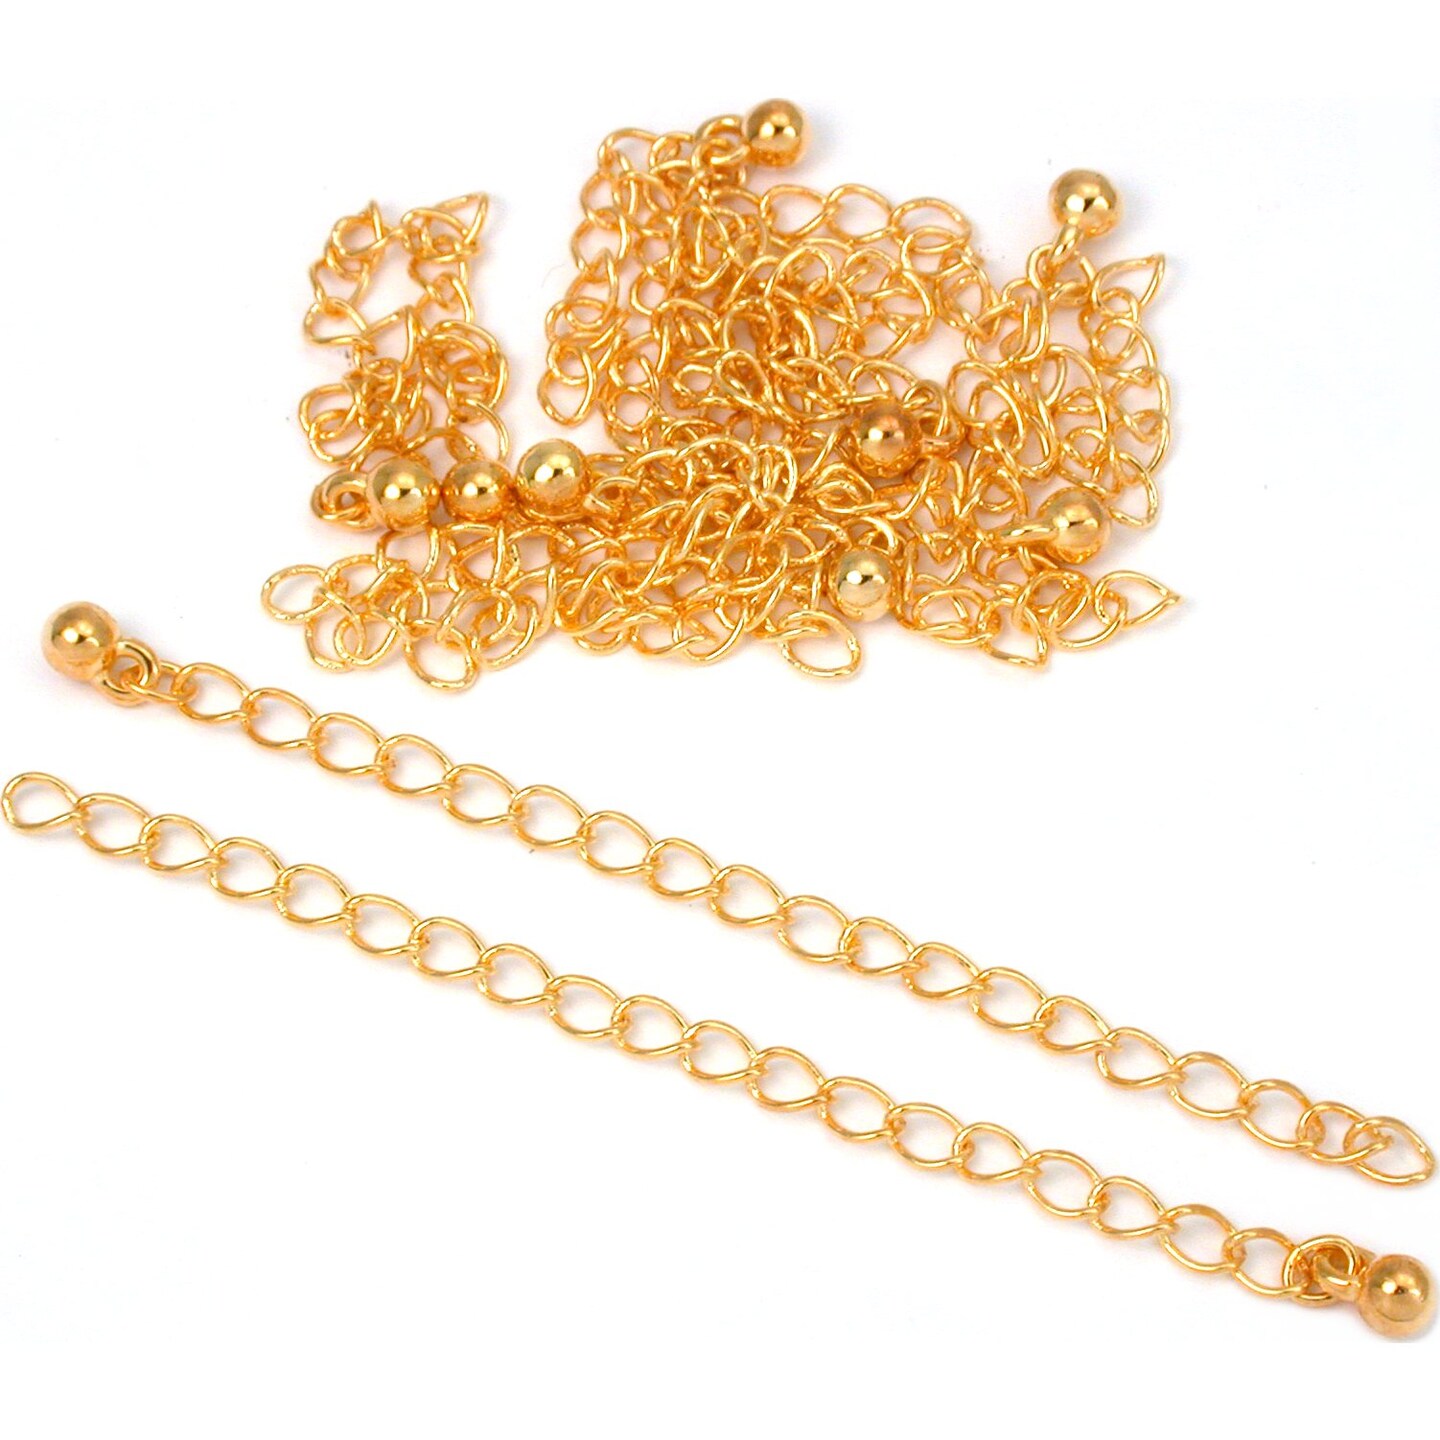 10 Real Gold Plated Necklace Chain Extenders 3 In. New